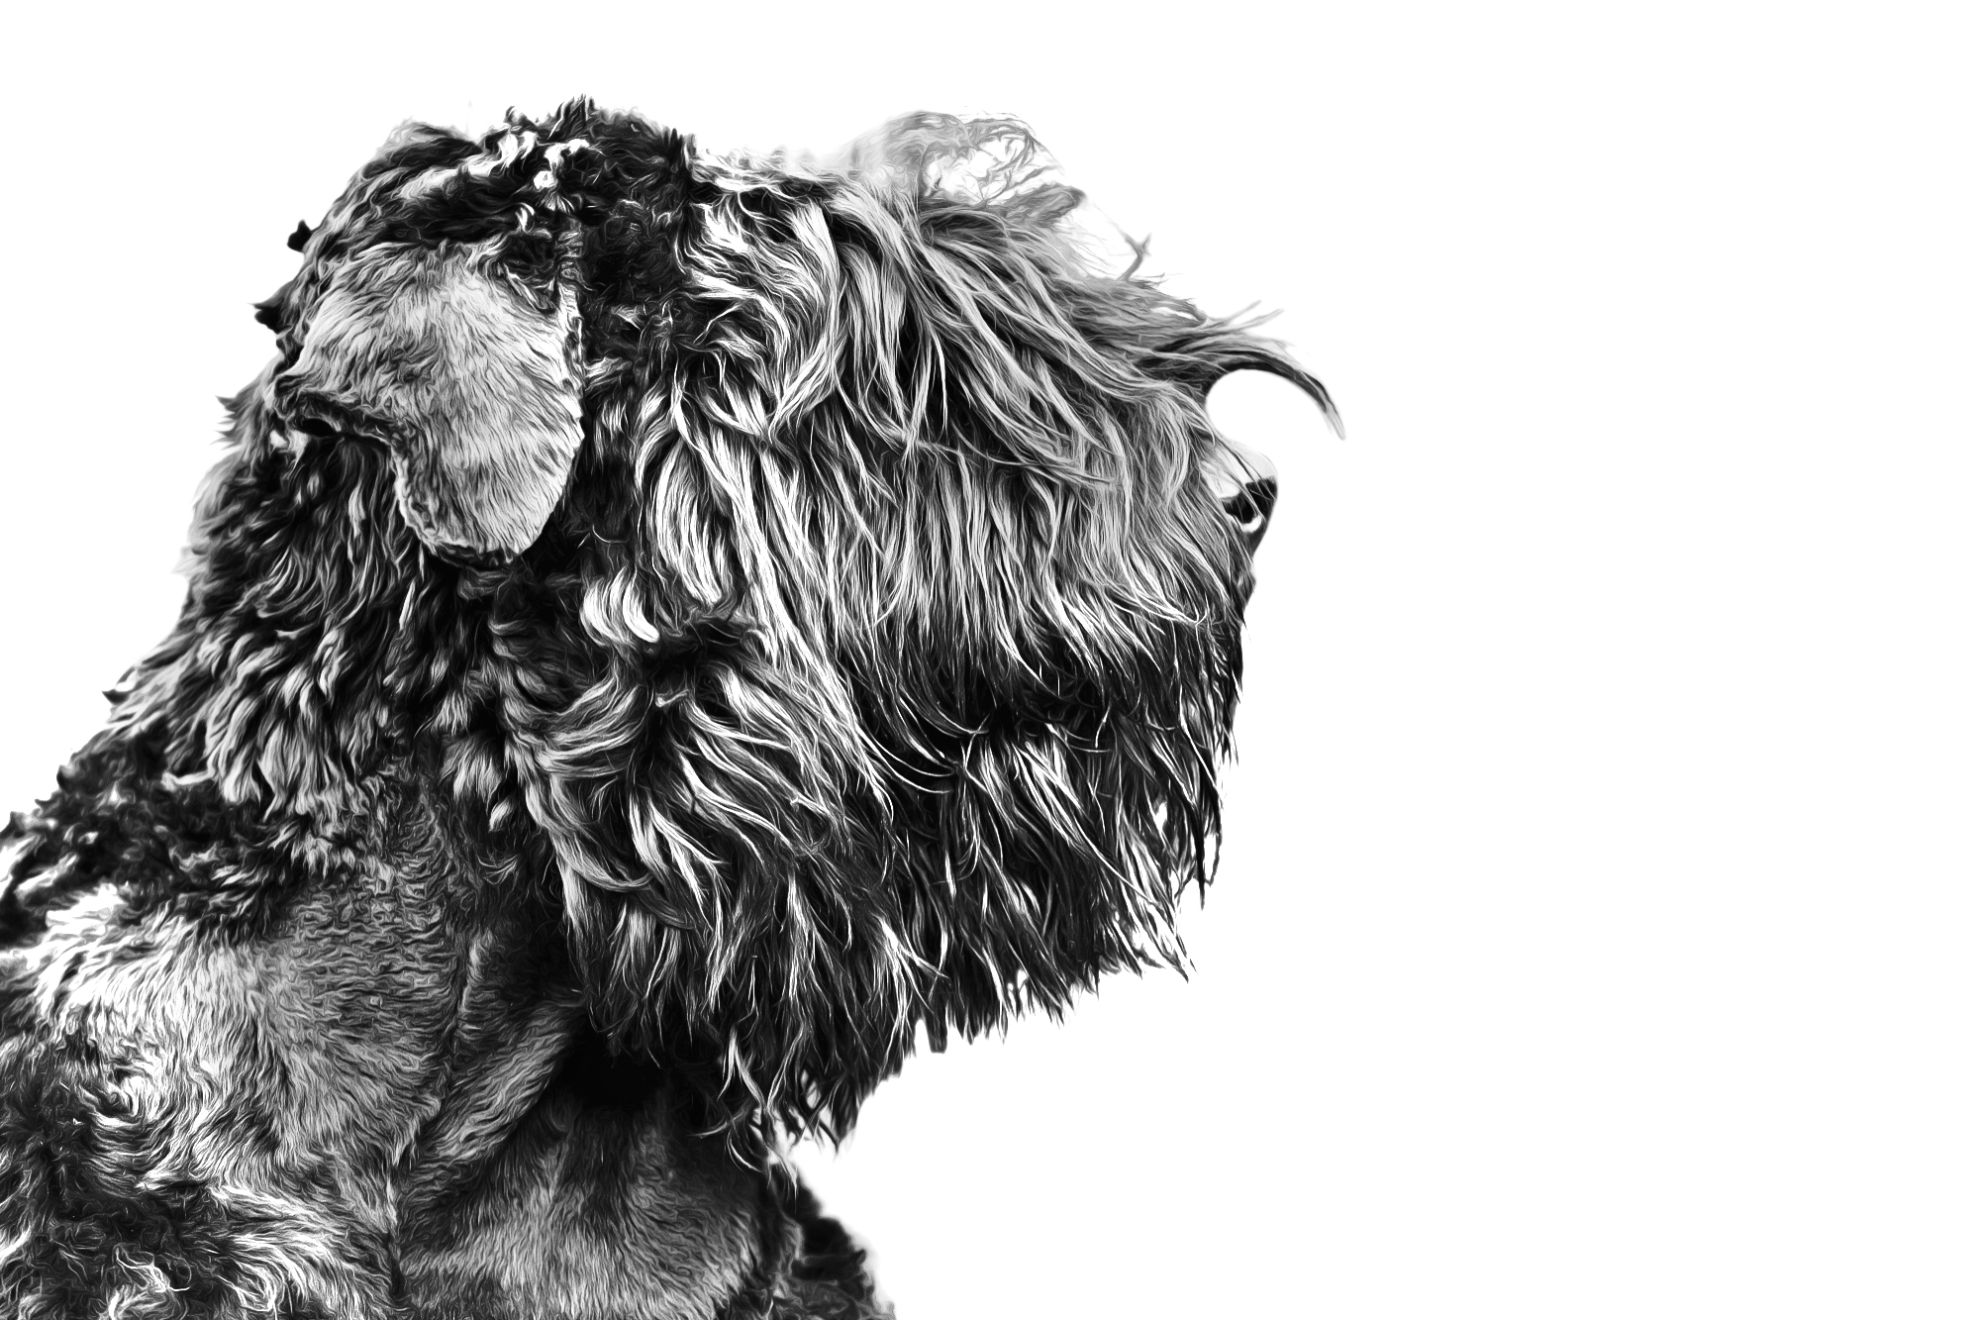 Russian Black Terrier in black and white